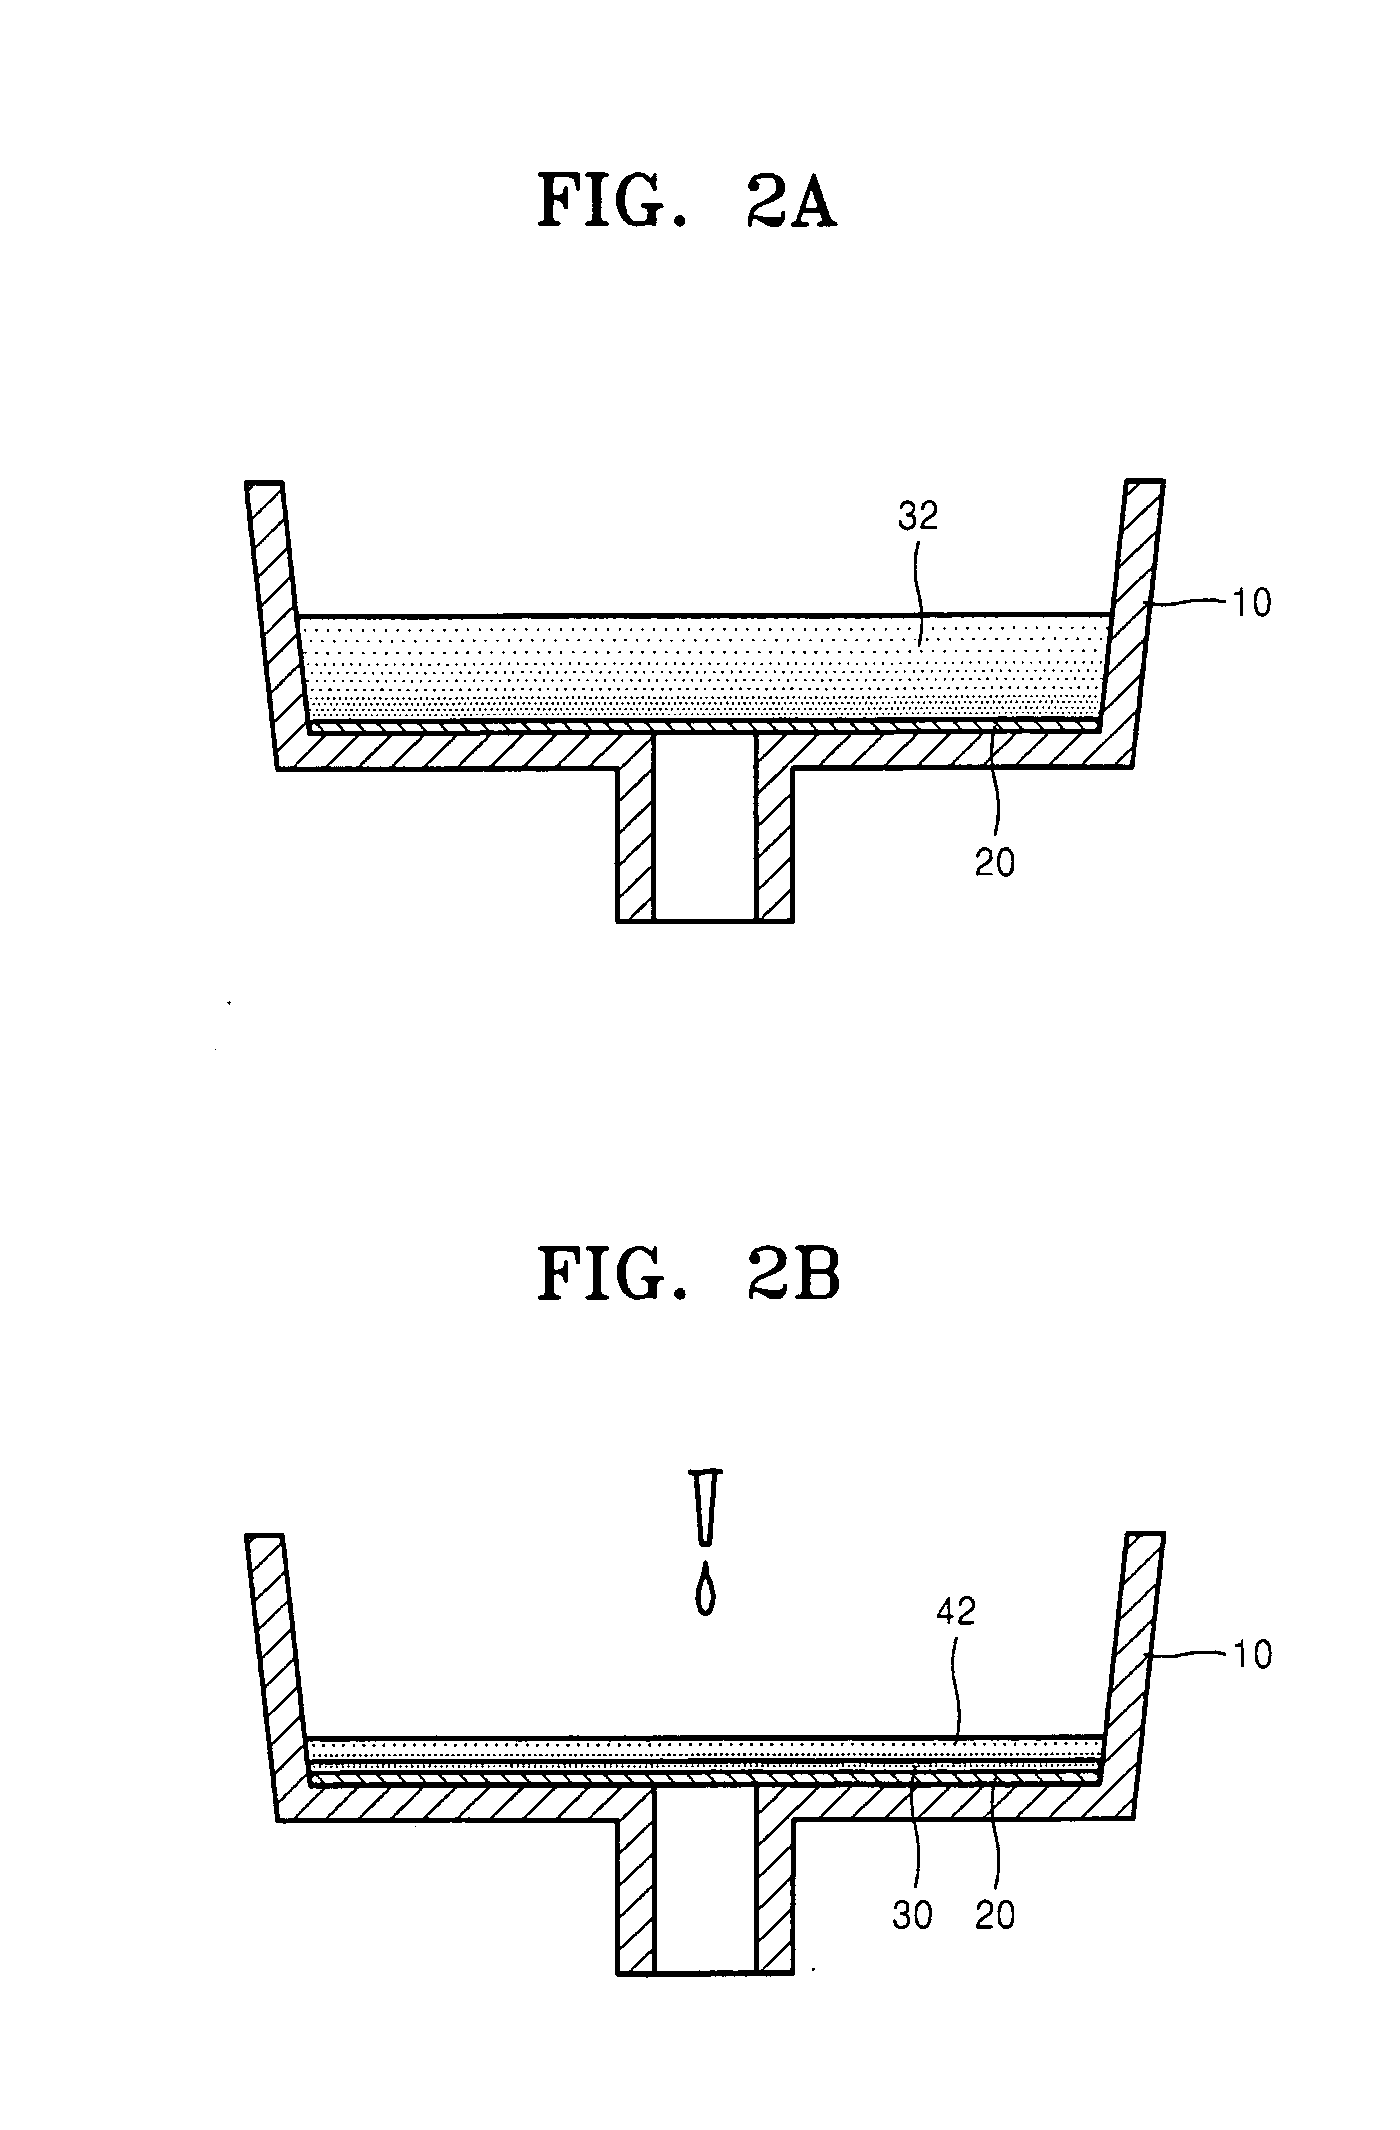 Hetero-junction membrane and method of producing the same